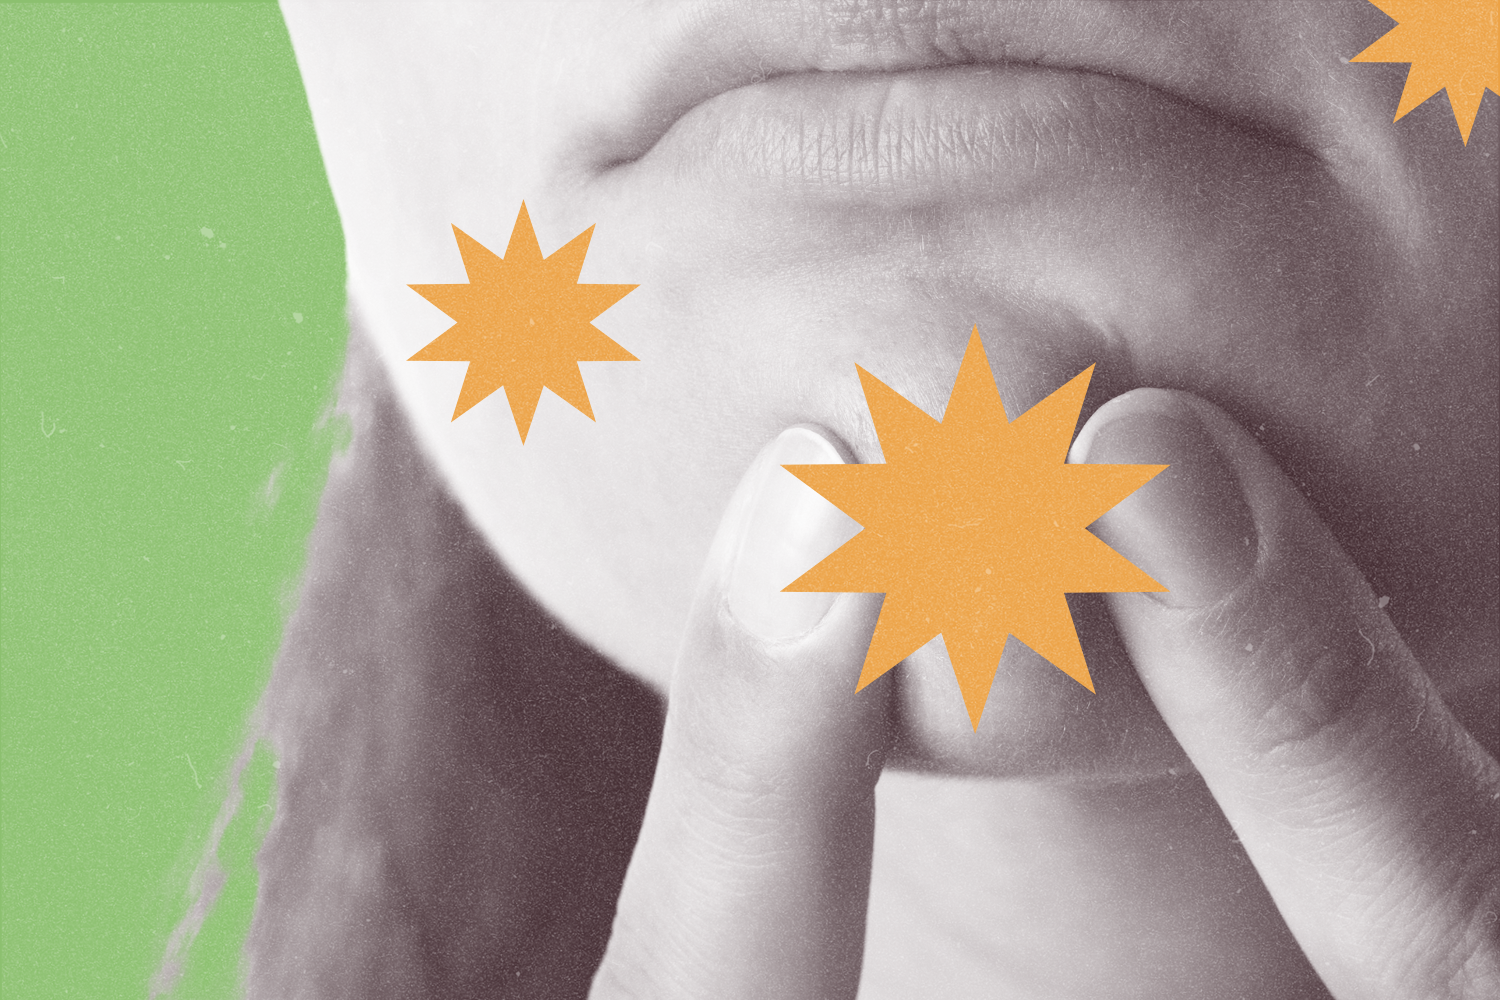 Why Is It So Bad To Pop A Pimple?